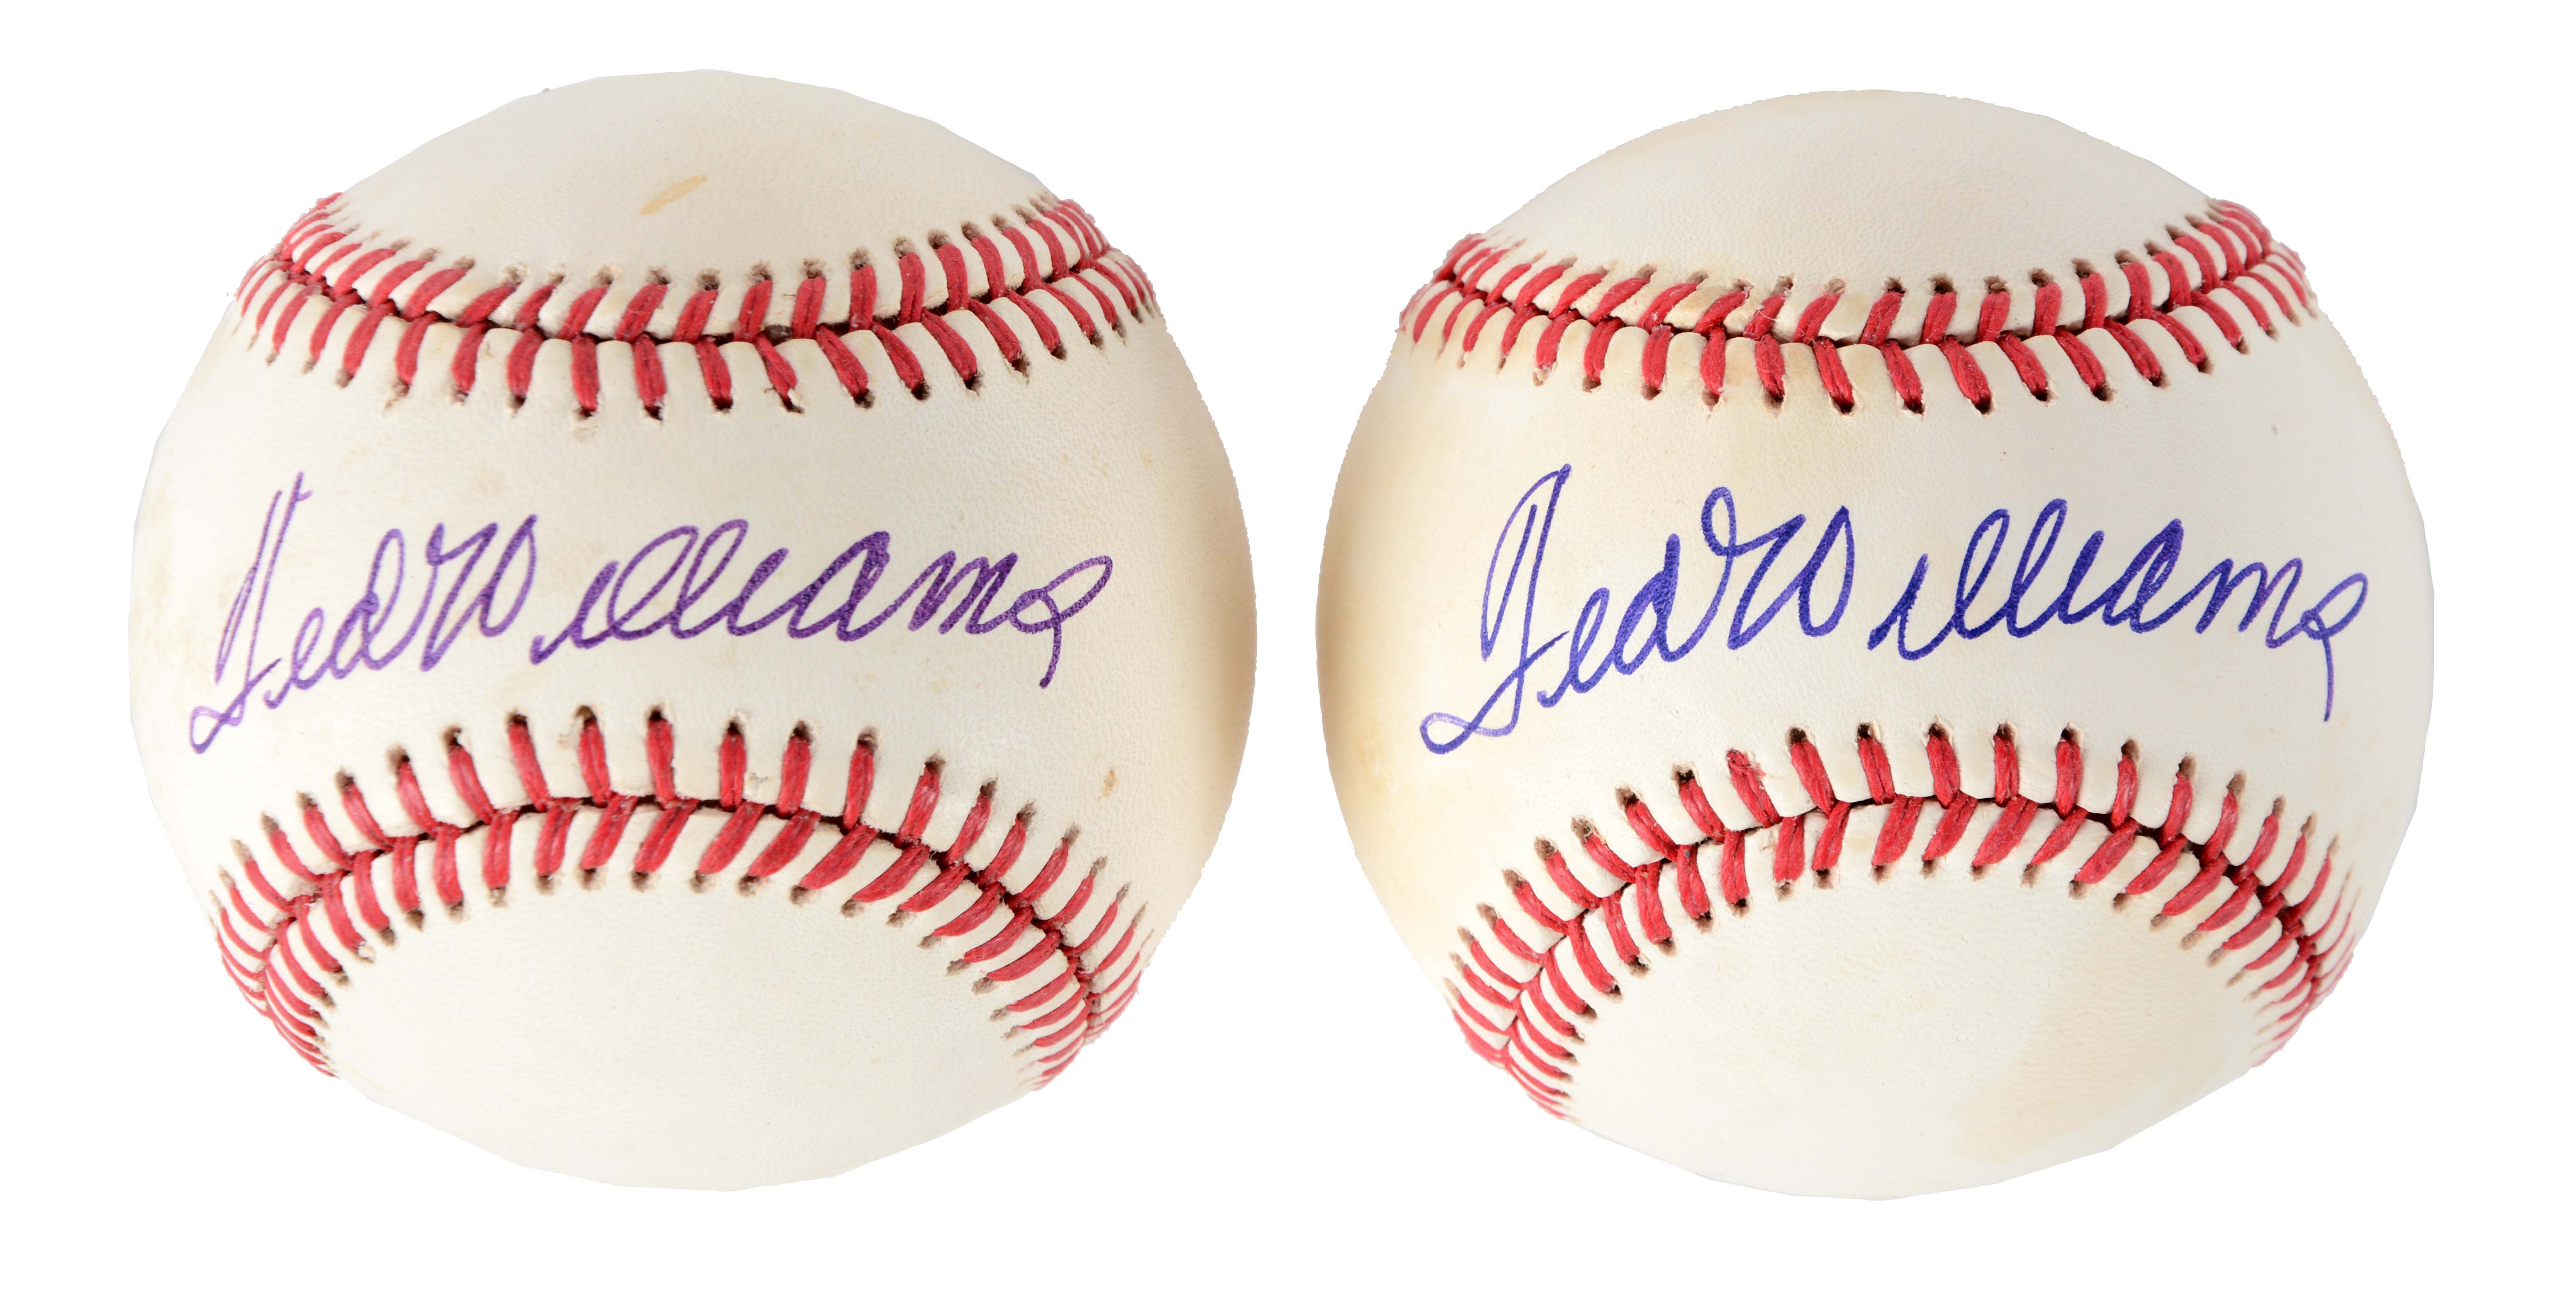 Lot of 2: Ted Williams Signed Baseballs. 